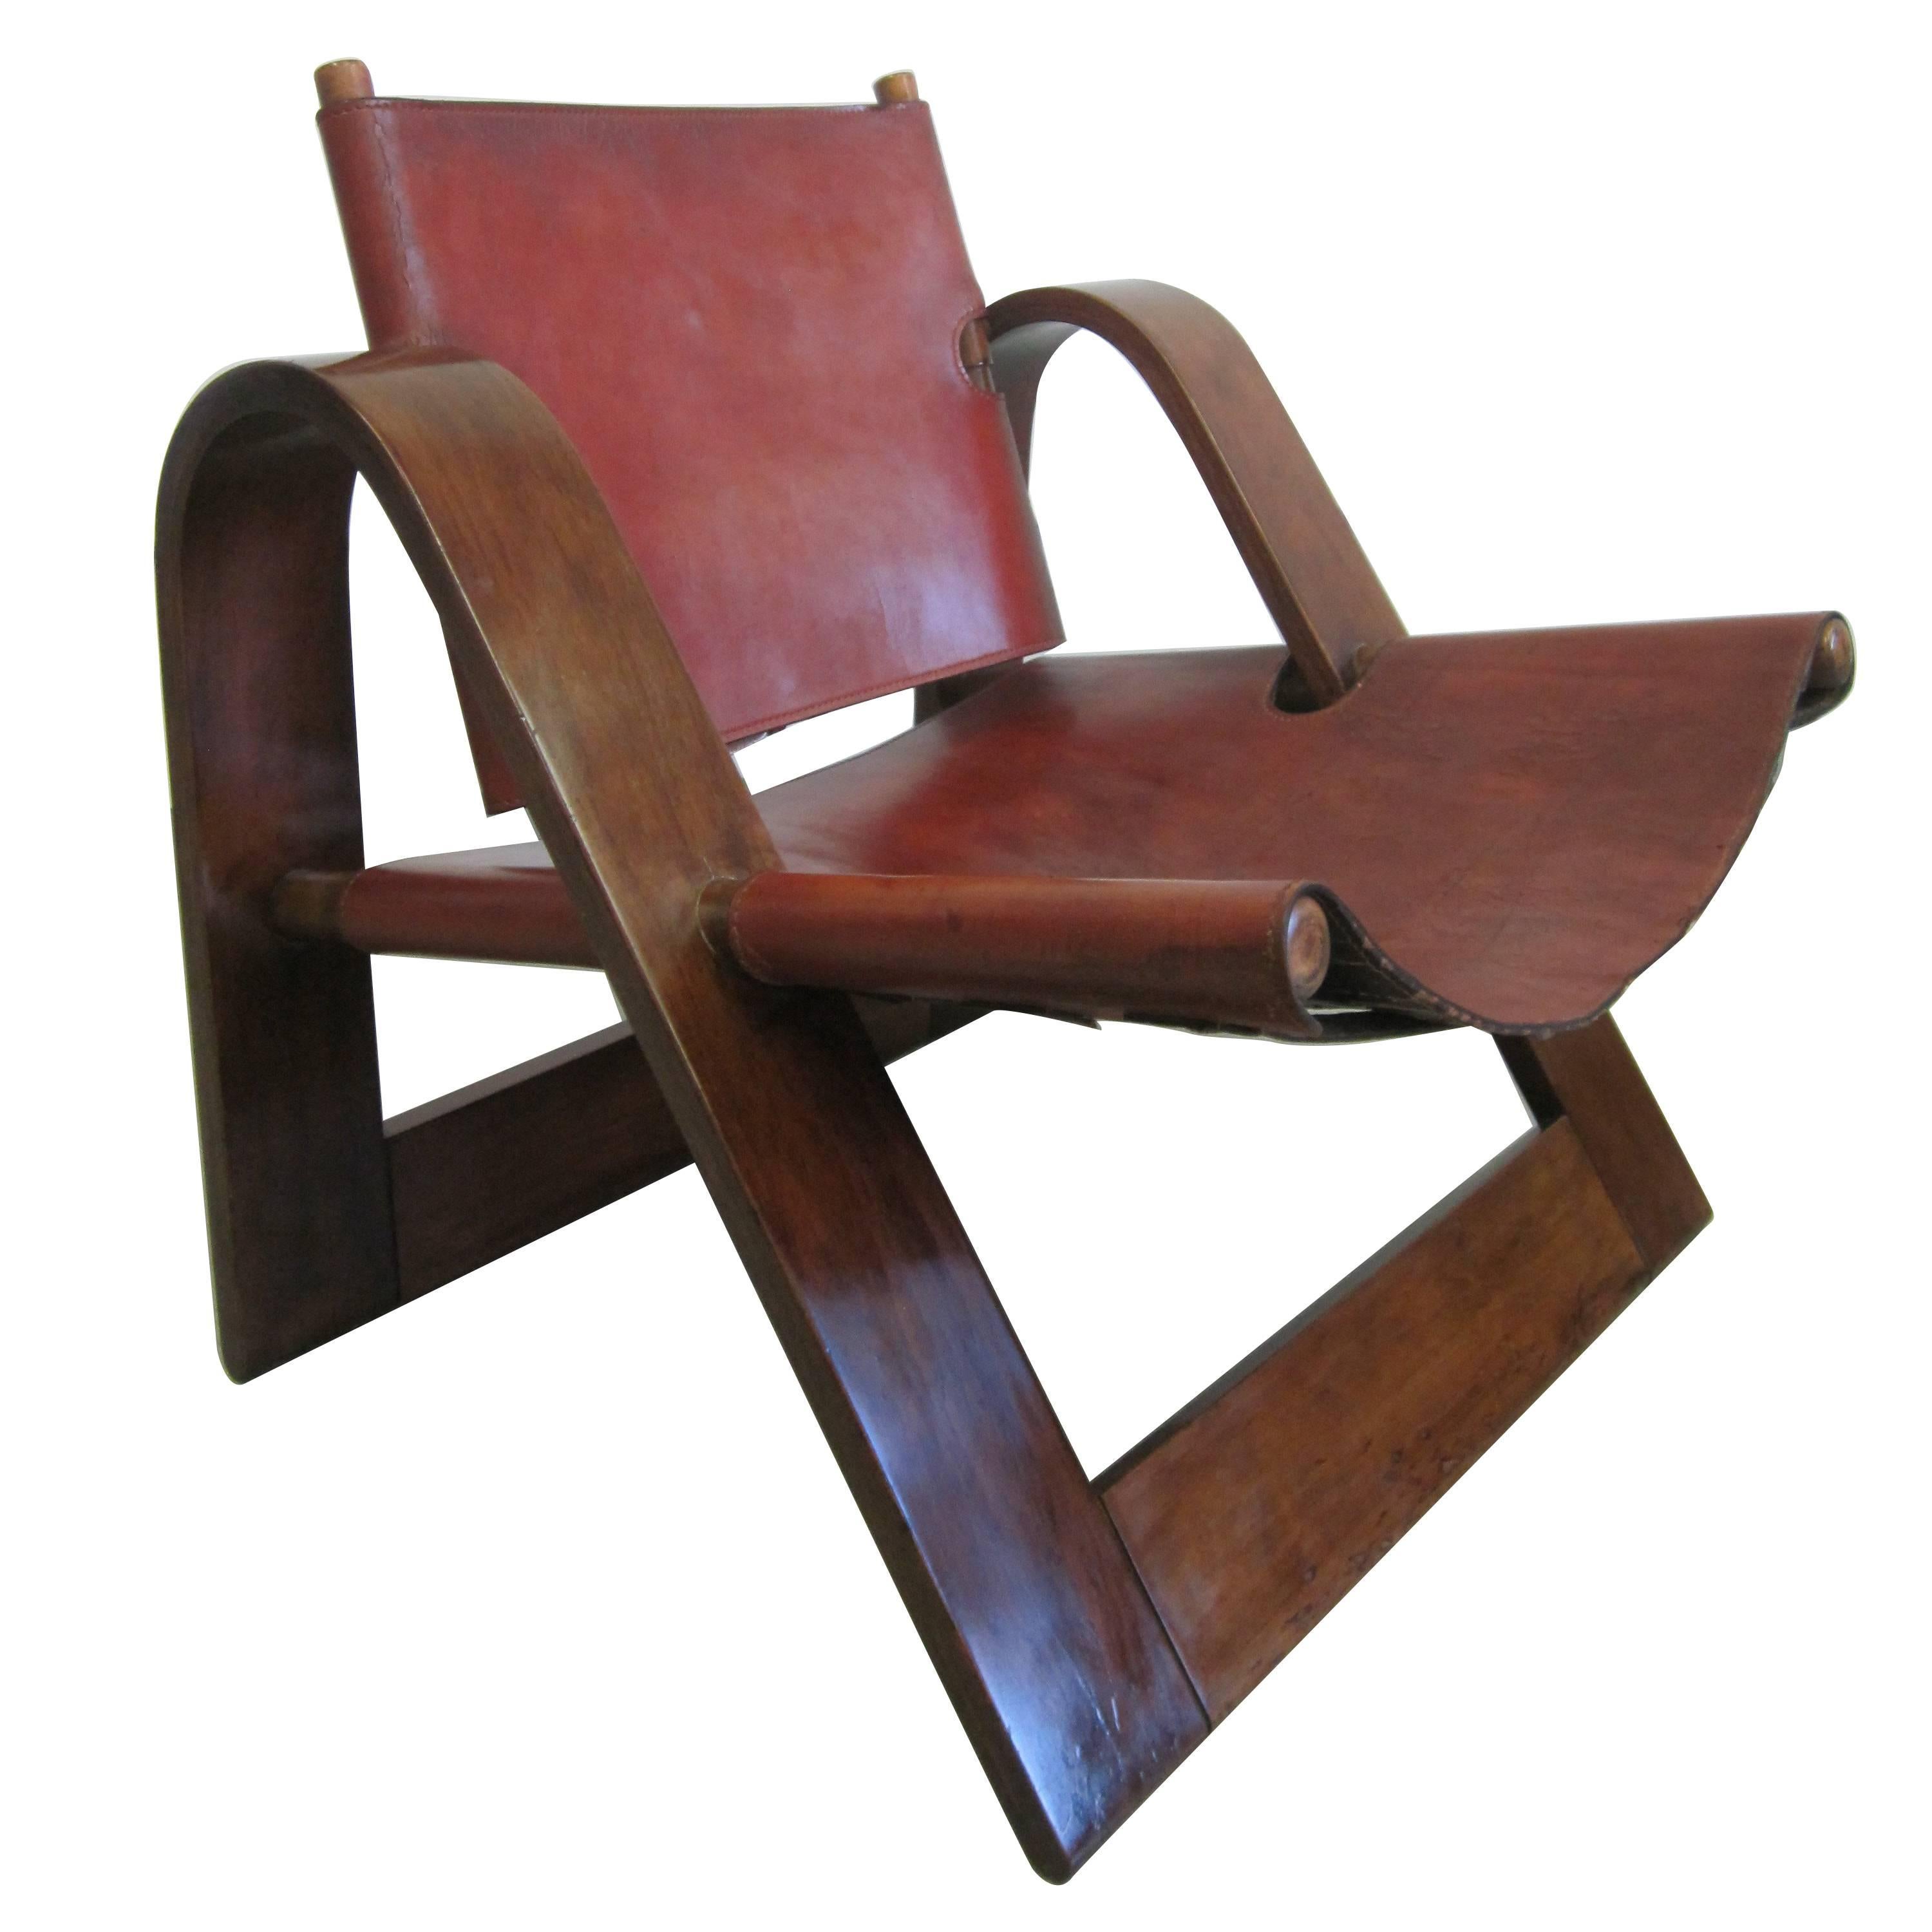 Danish Mid-Century Modern Leather Strap Chair Attributed to Borge Mogensen For Sale